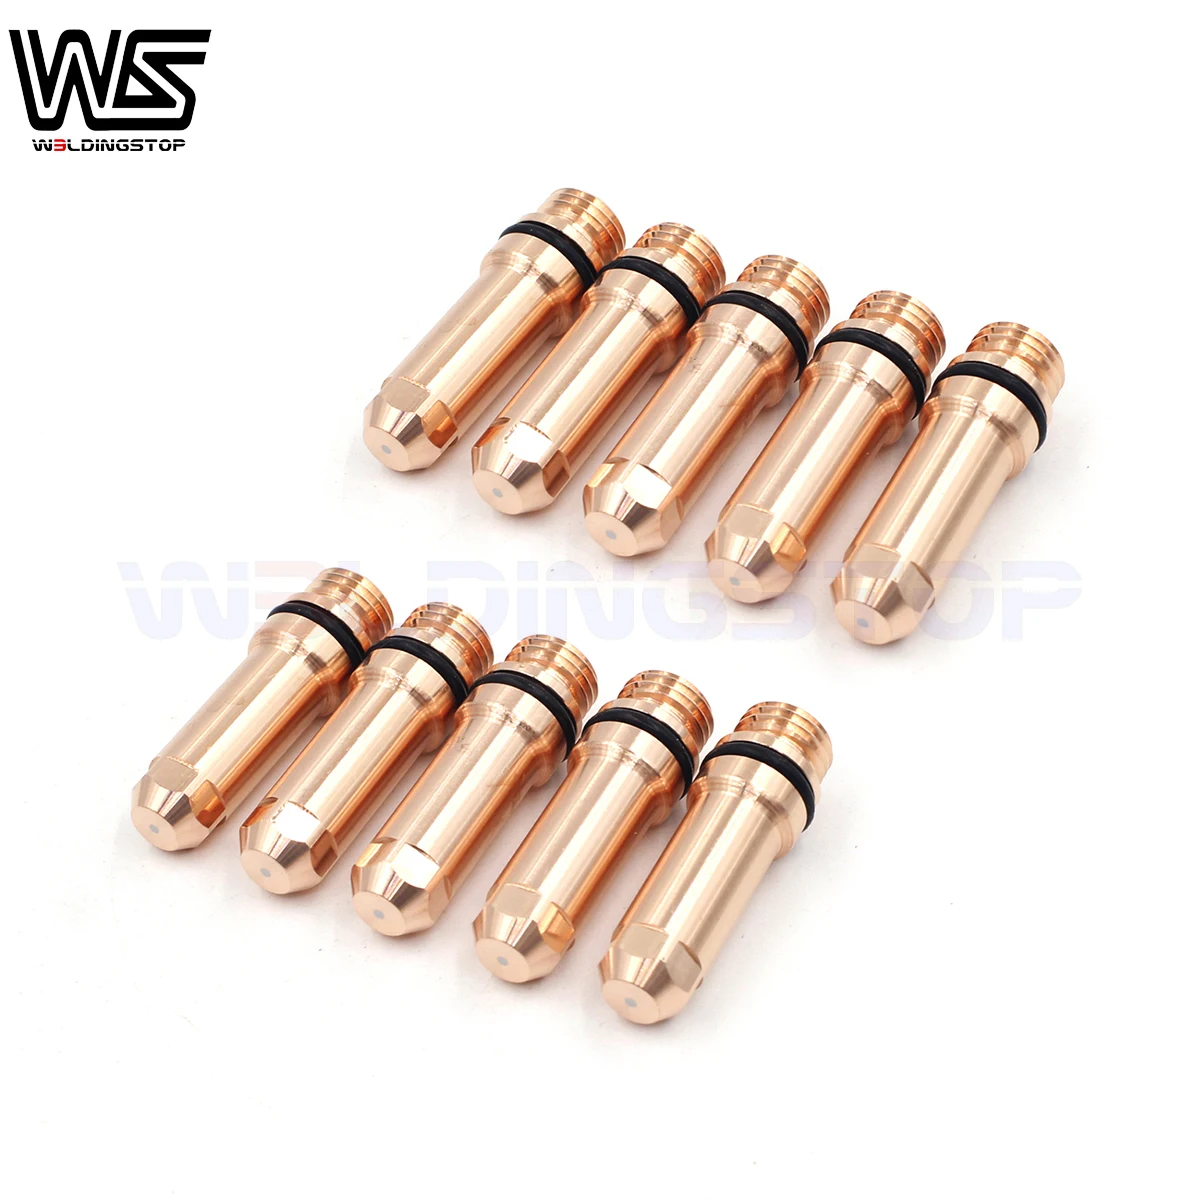 Plasma electrode 120547 10pcs fitting in 200 Cutting Torch Consumables replacement